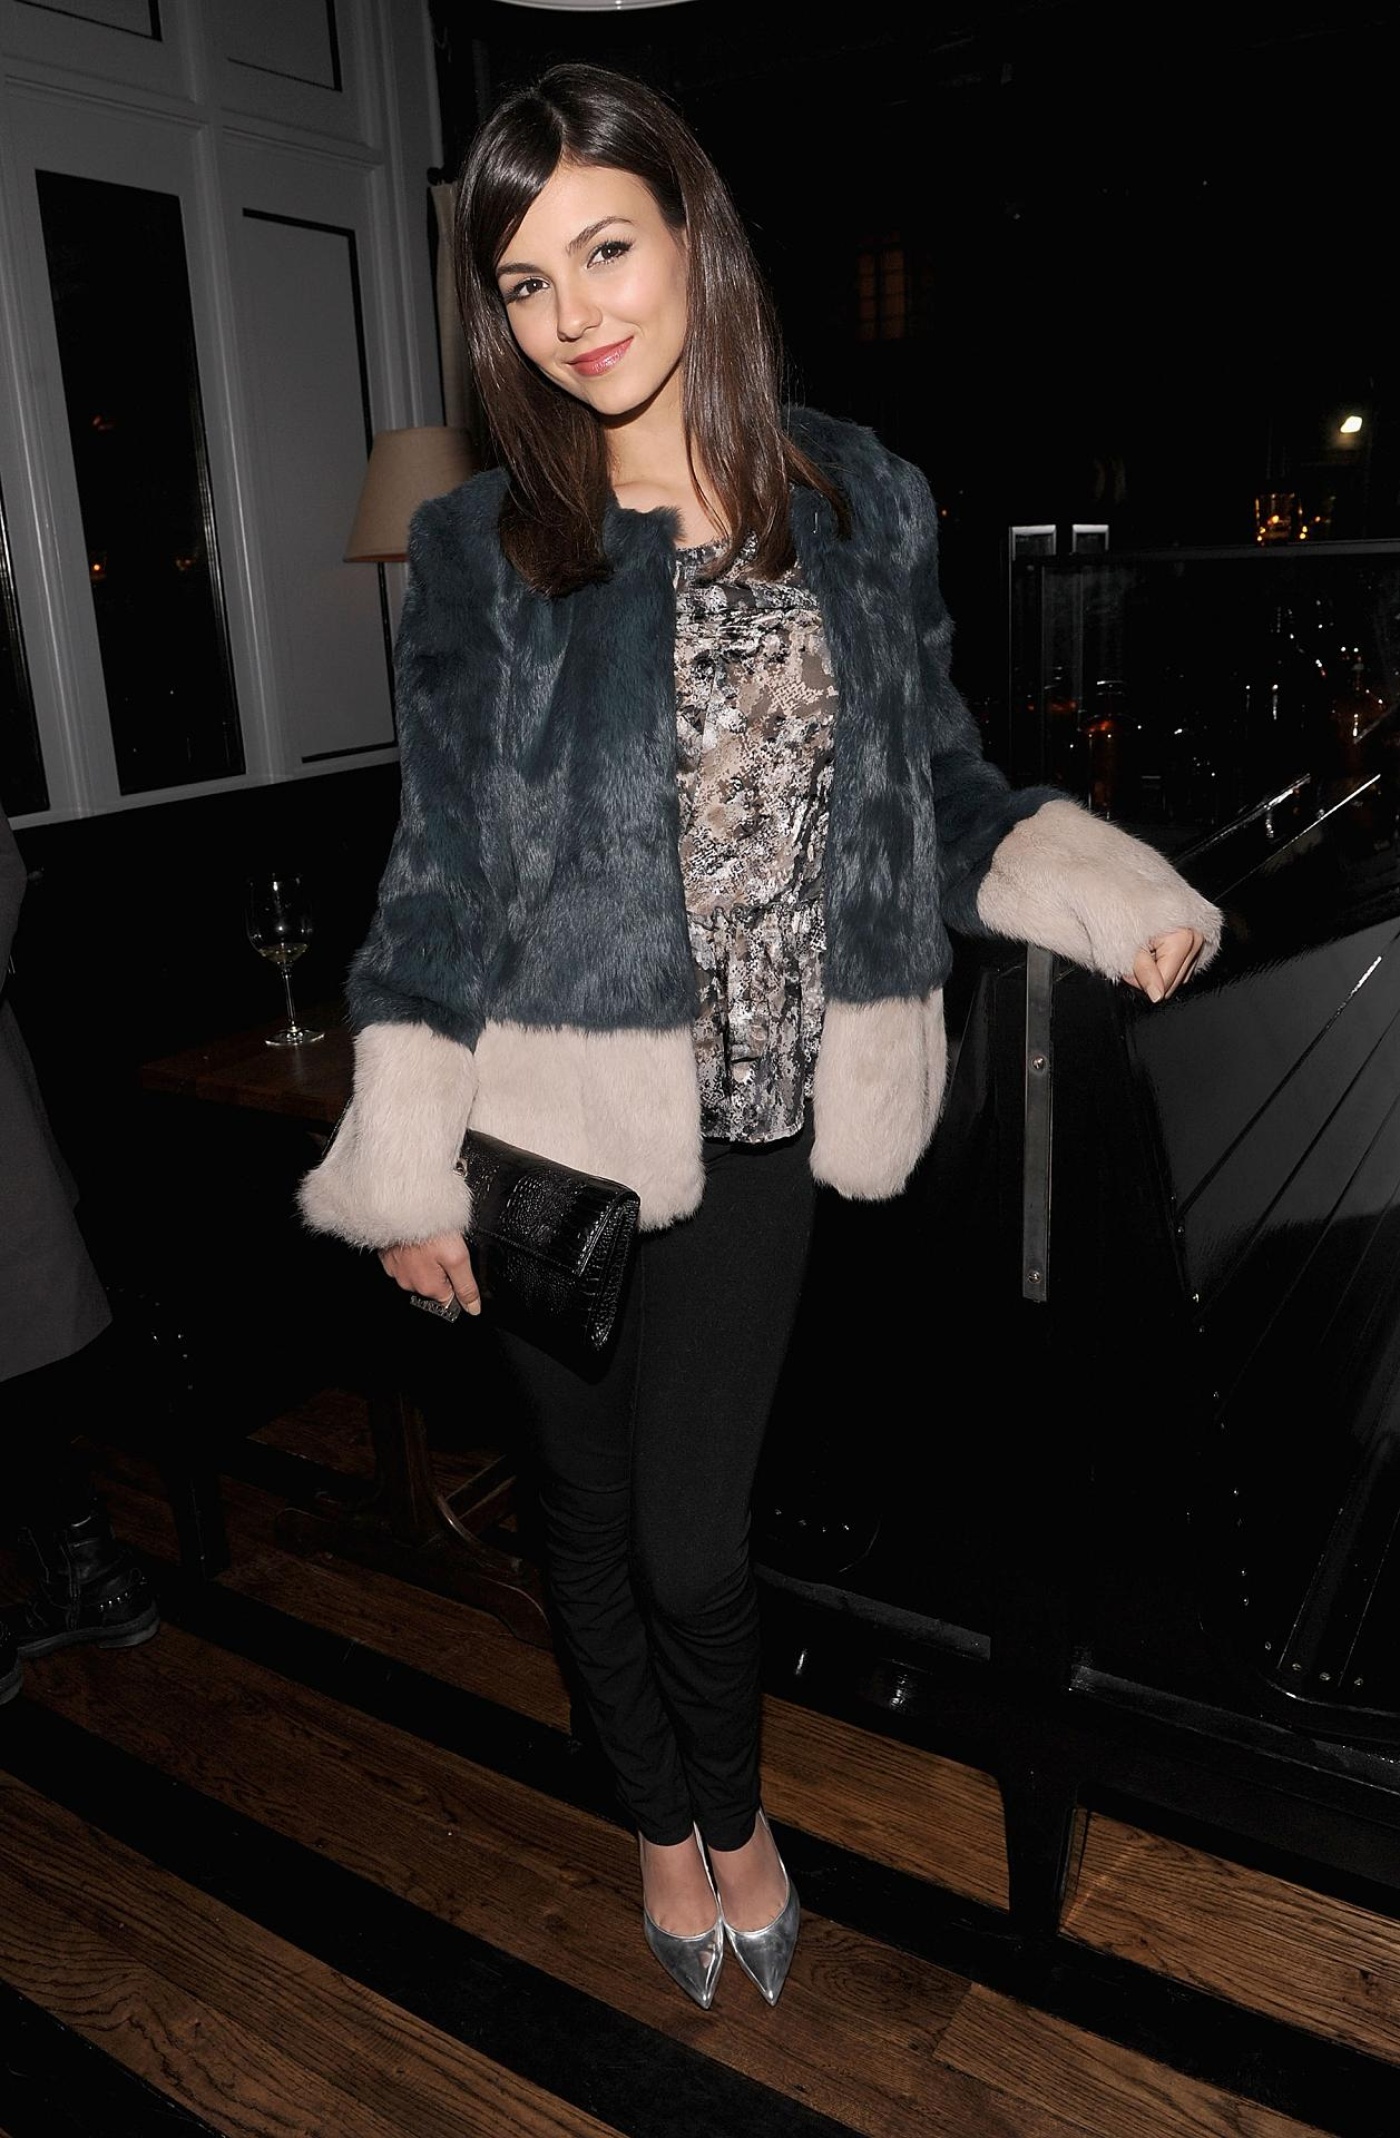 Victoria Justice at Cinema Society submitted by Canary + Rook